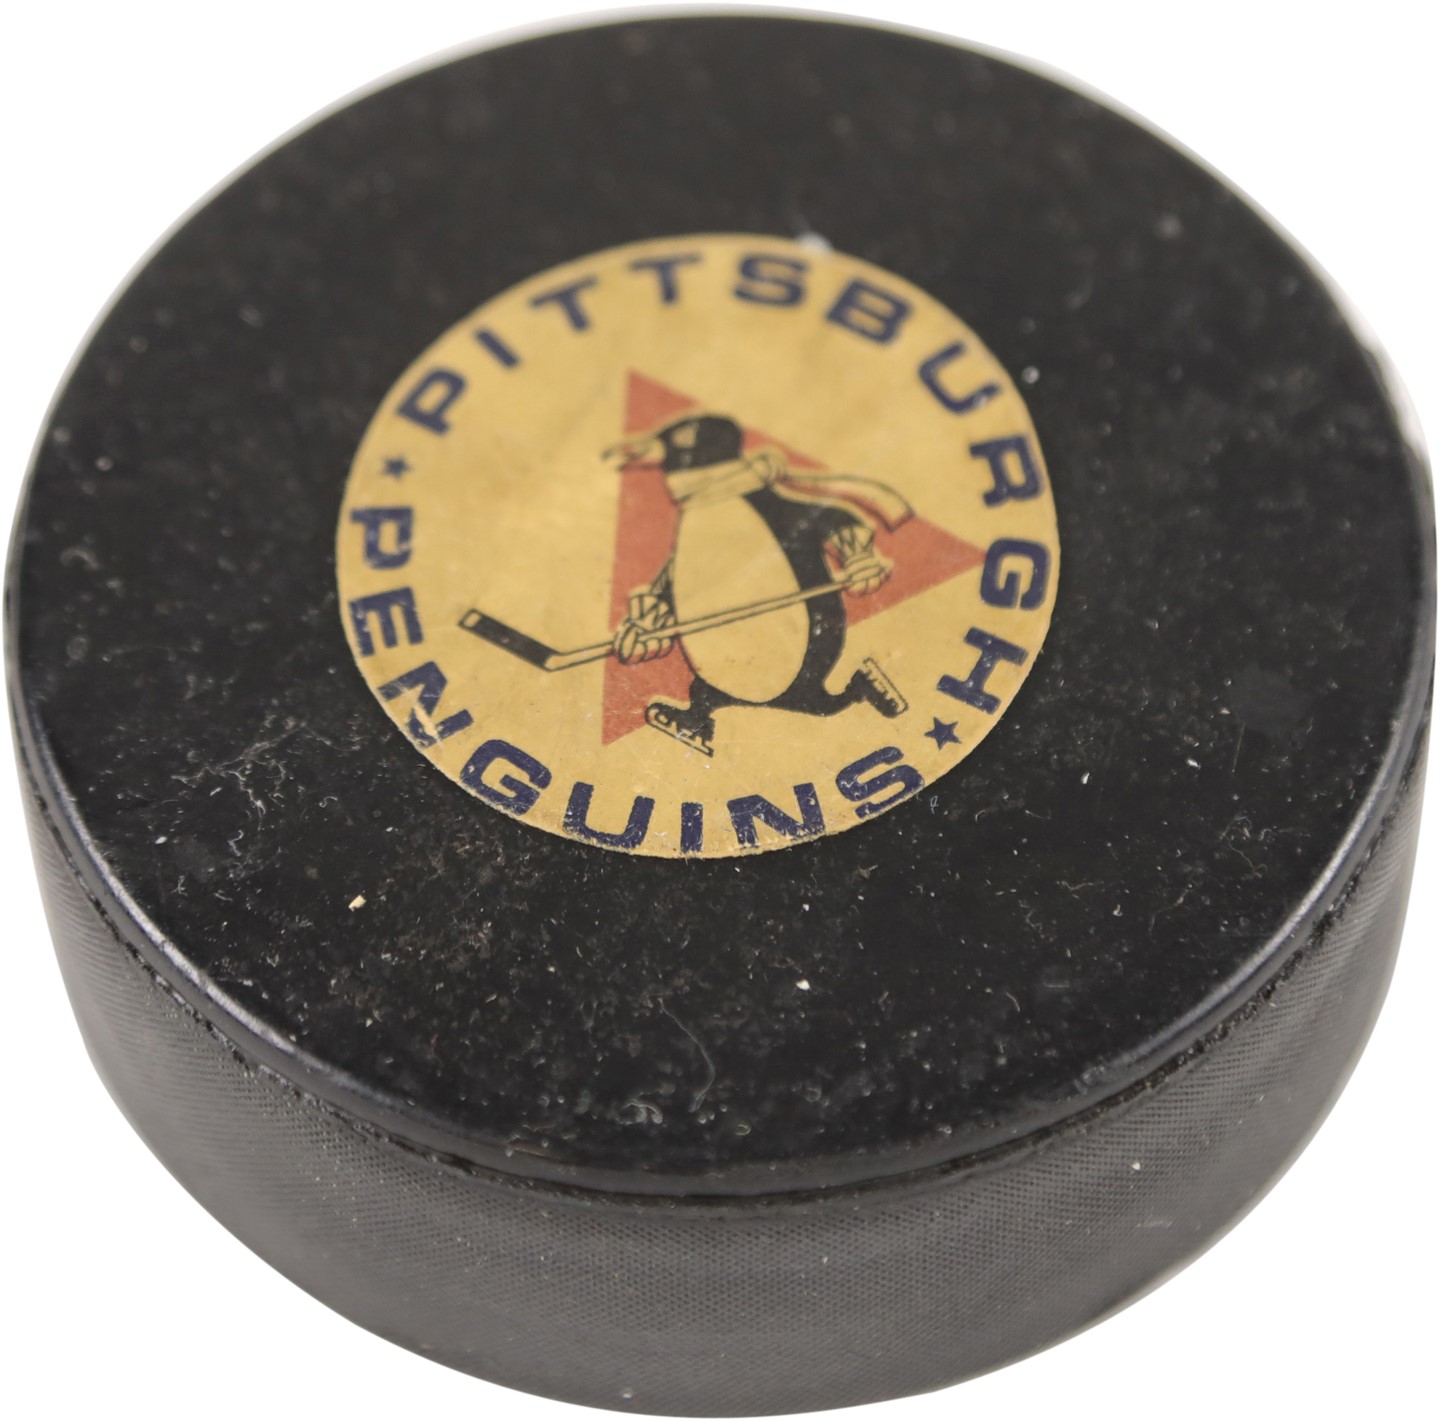 Buffalo Sabres Collection - The Very First Goal Puck in Buffalo Sabres History (Jim Watson Letter)